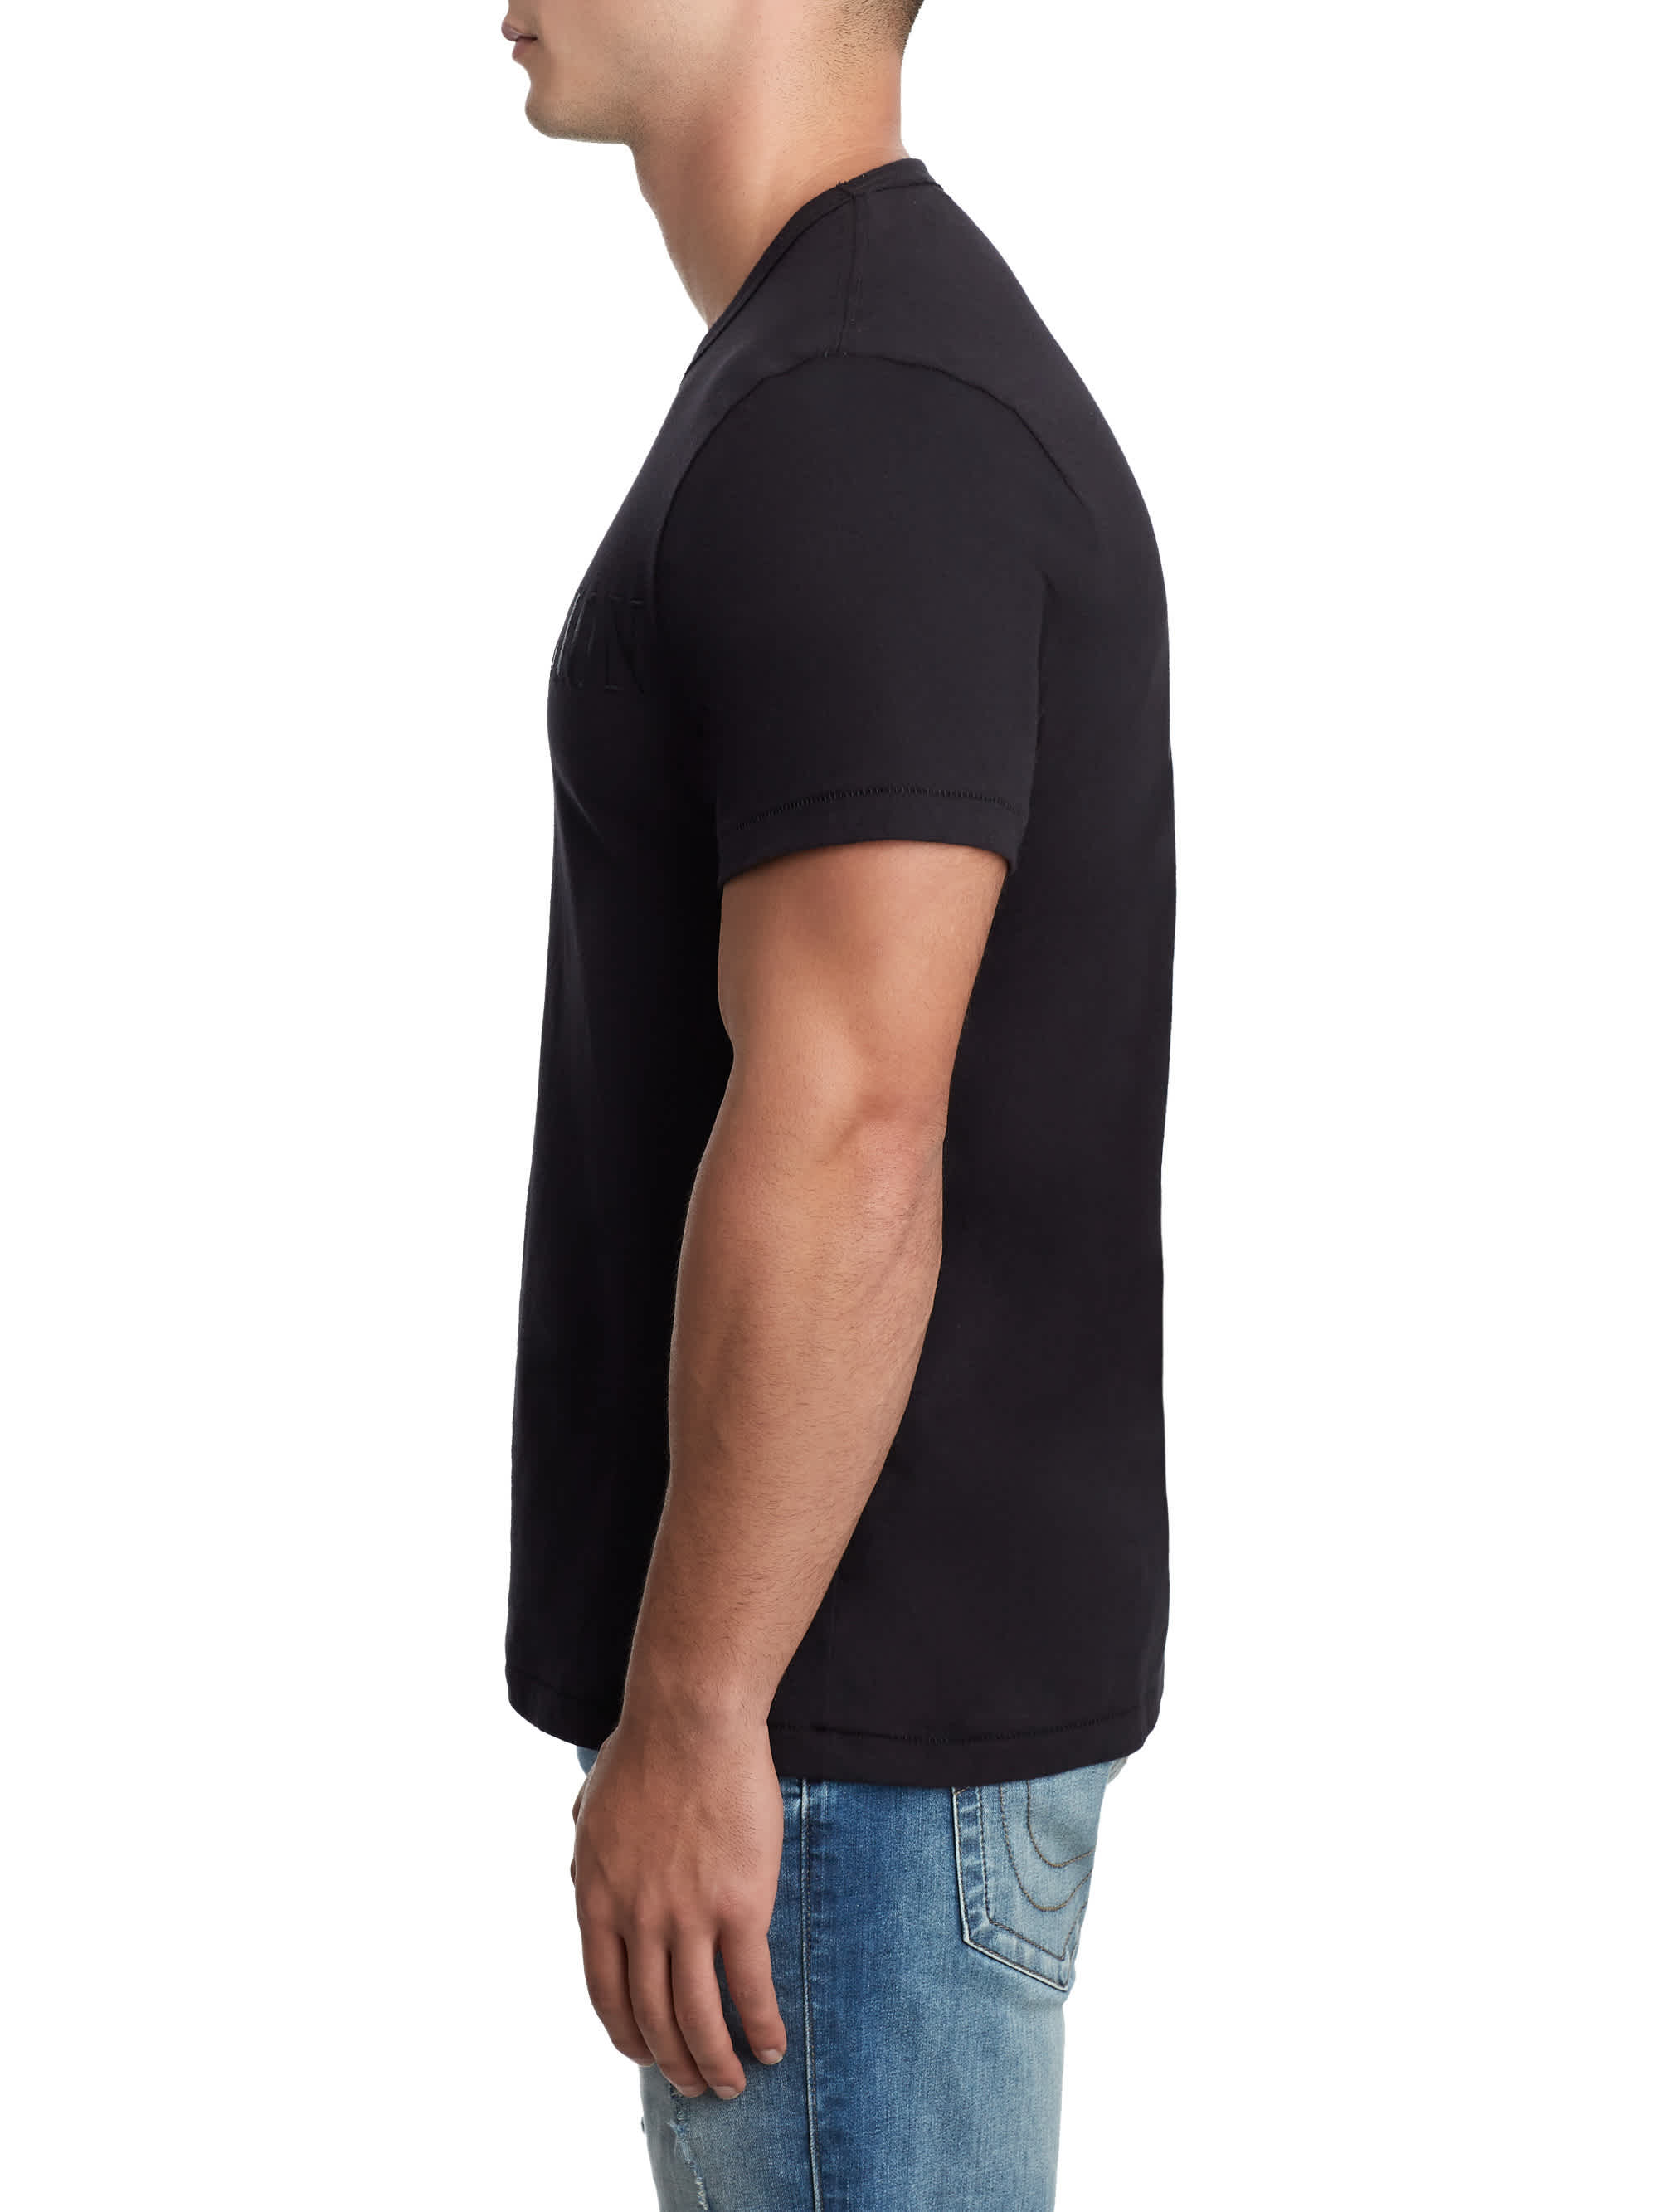 MENS EMBROIDERED LOGO TEE